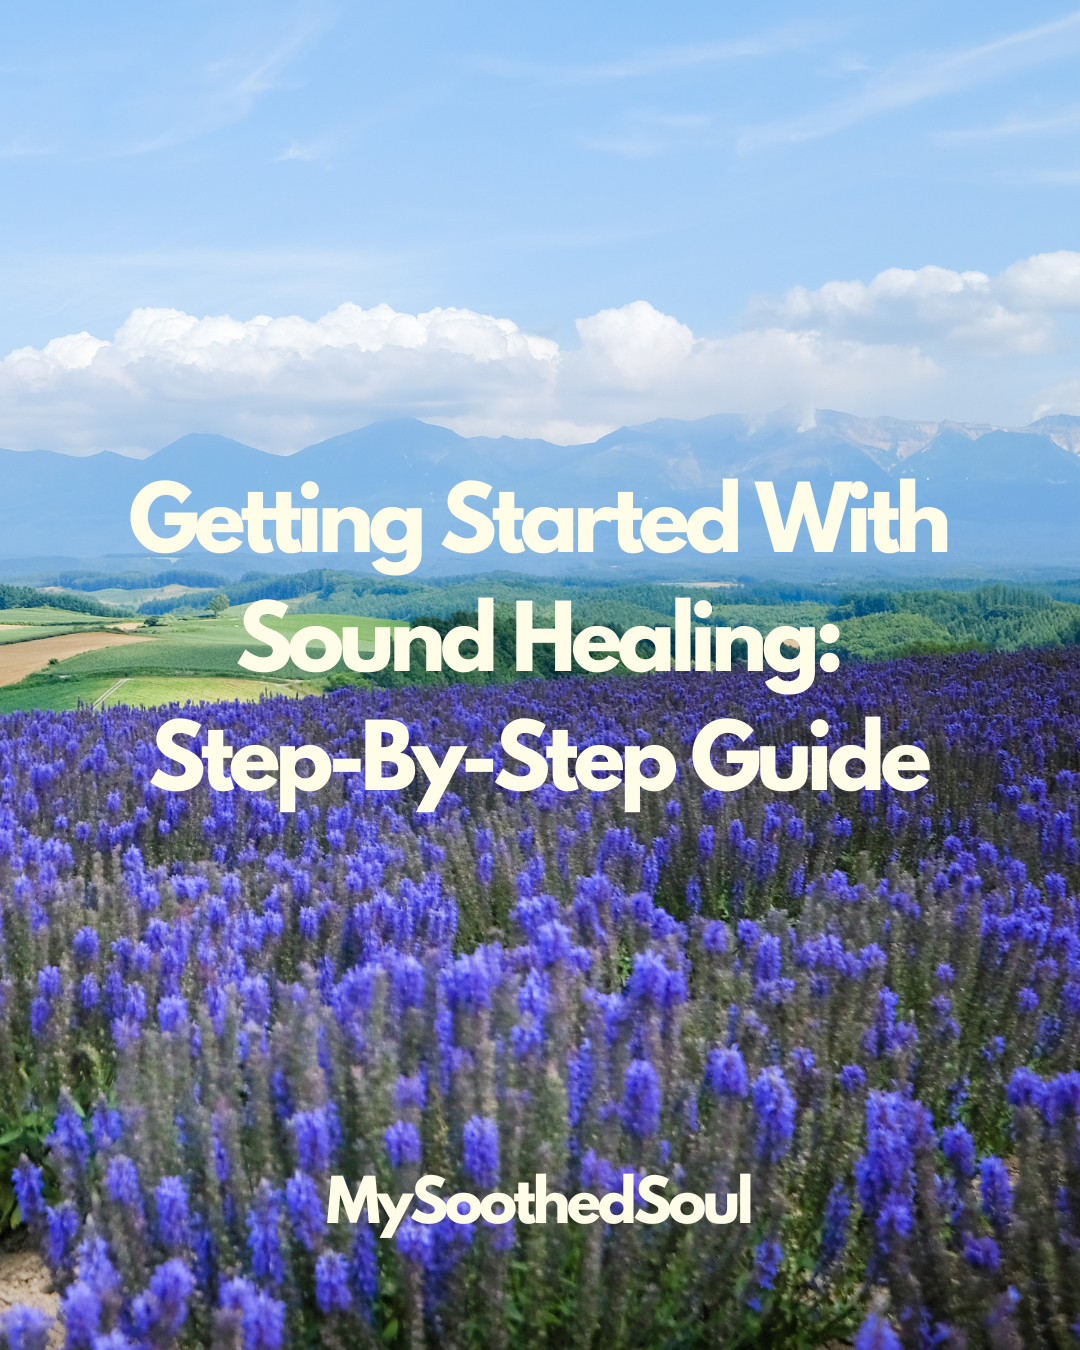 Getting Started with Sound Healing: Step-by-Step Guide